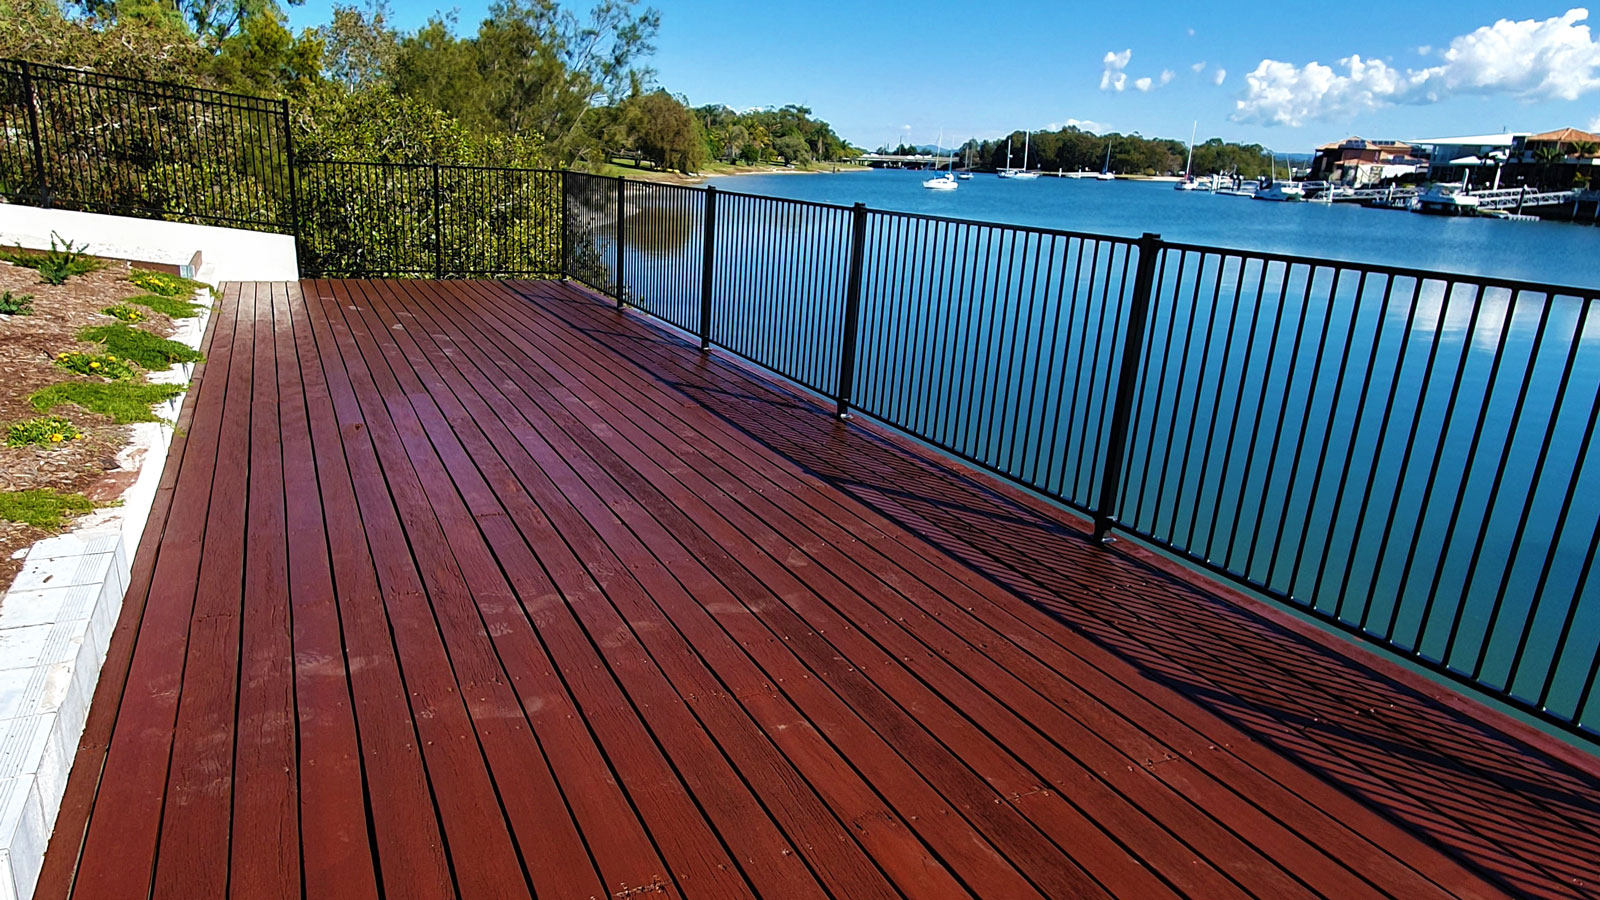 timber decking with railings near the lake